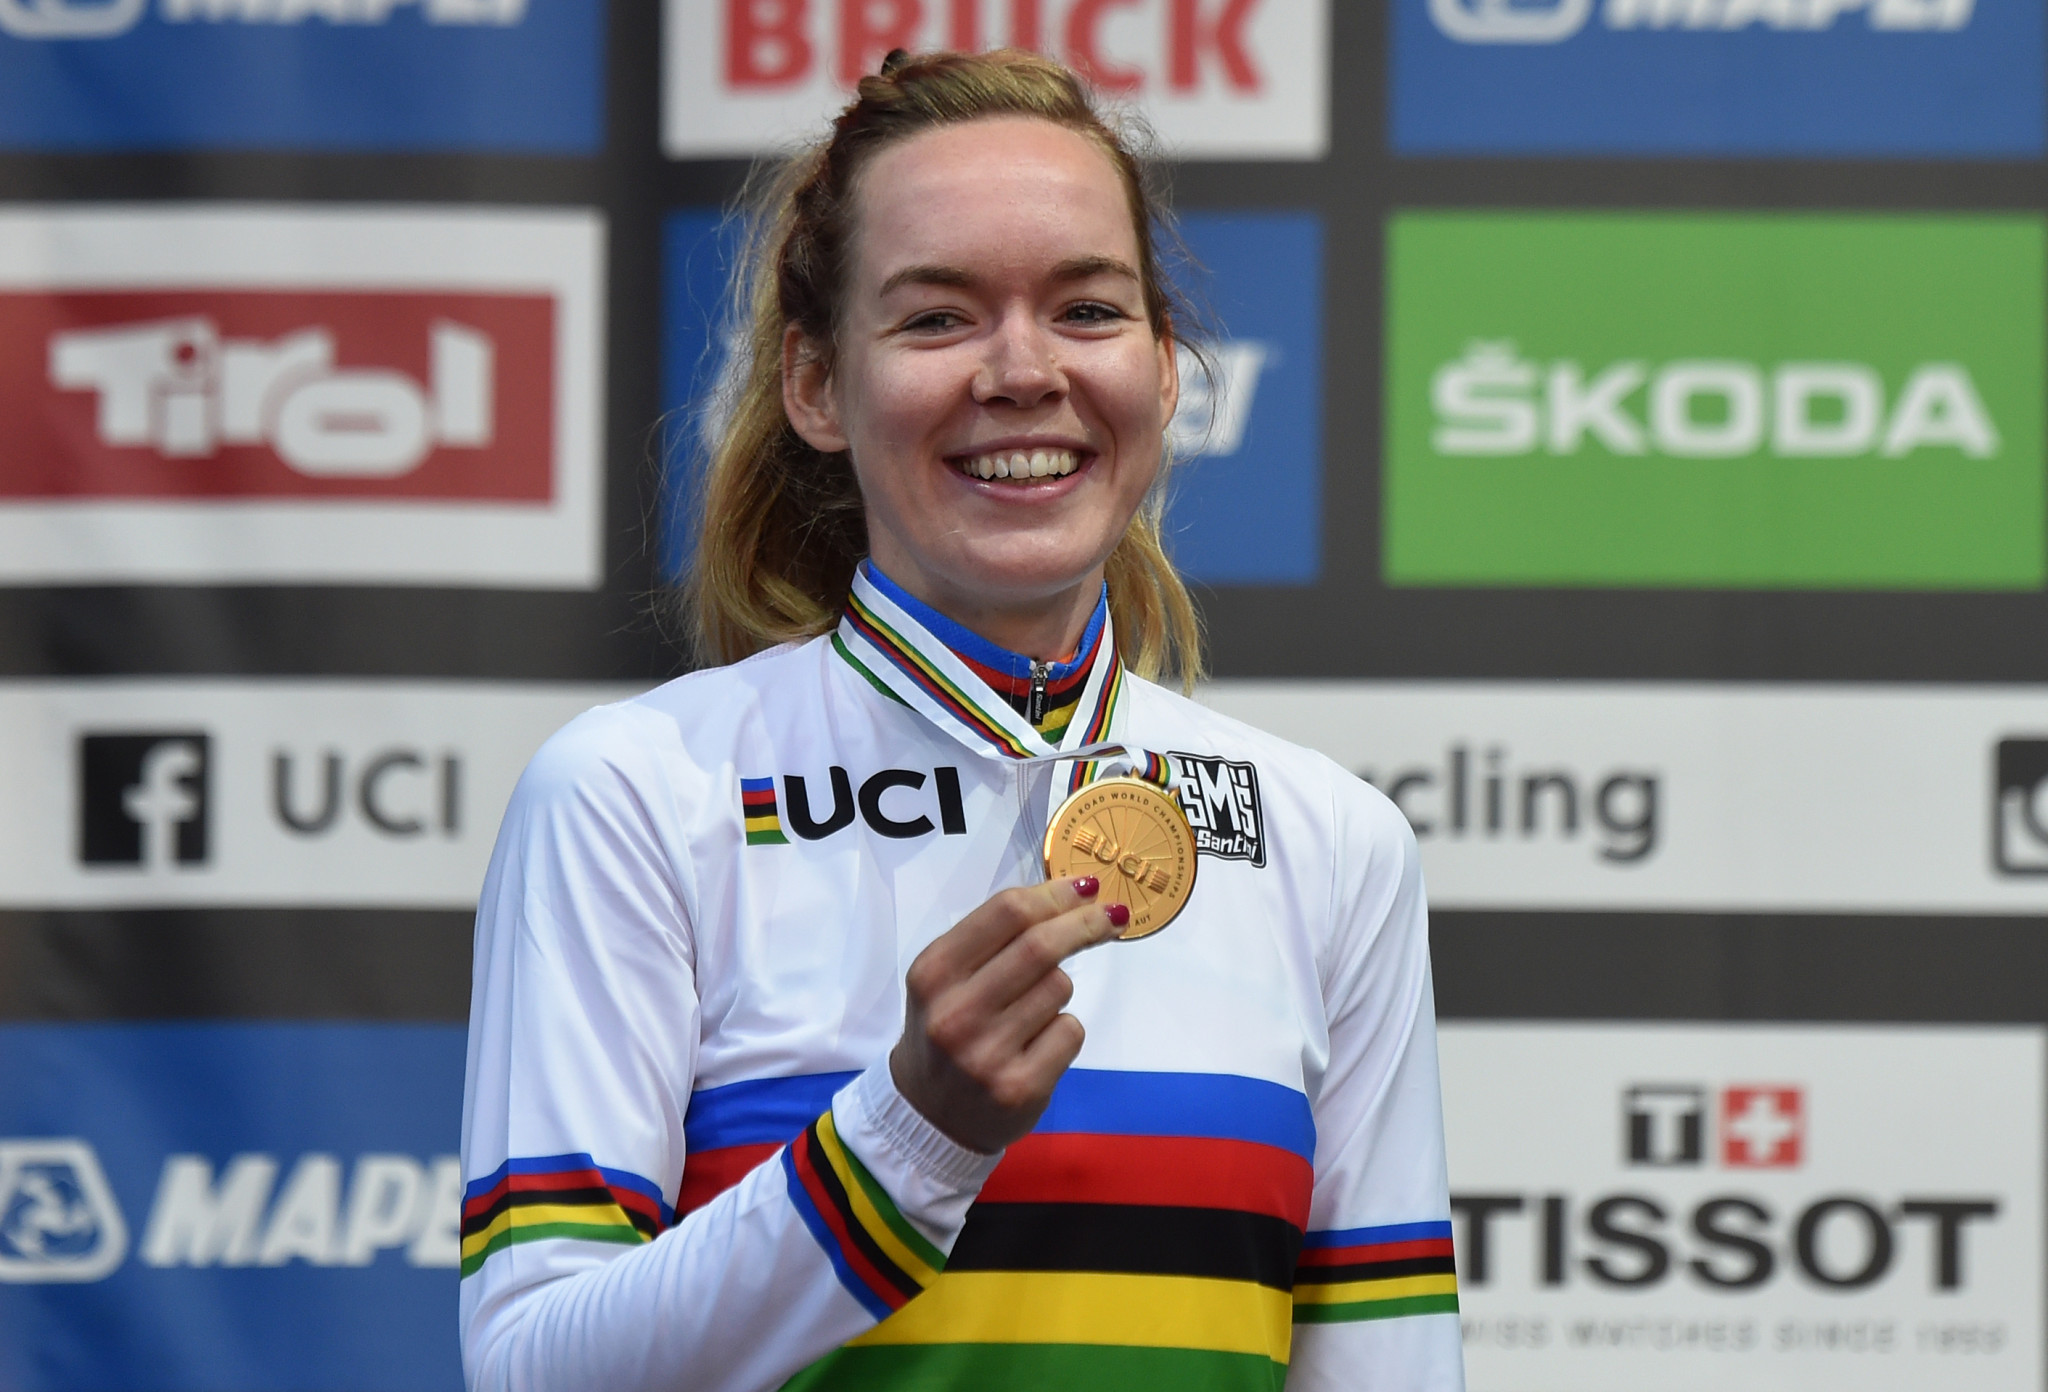 Anna van der Breggen achieved a dominant victory in the women's road race ©Getty Images